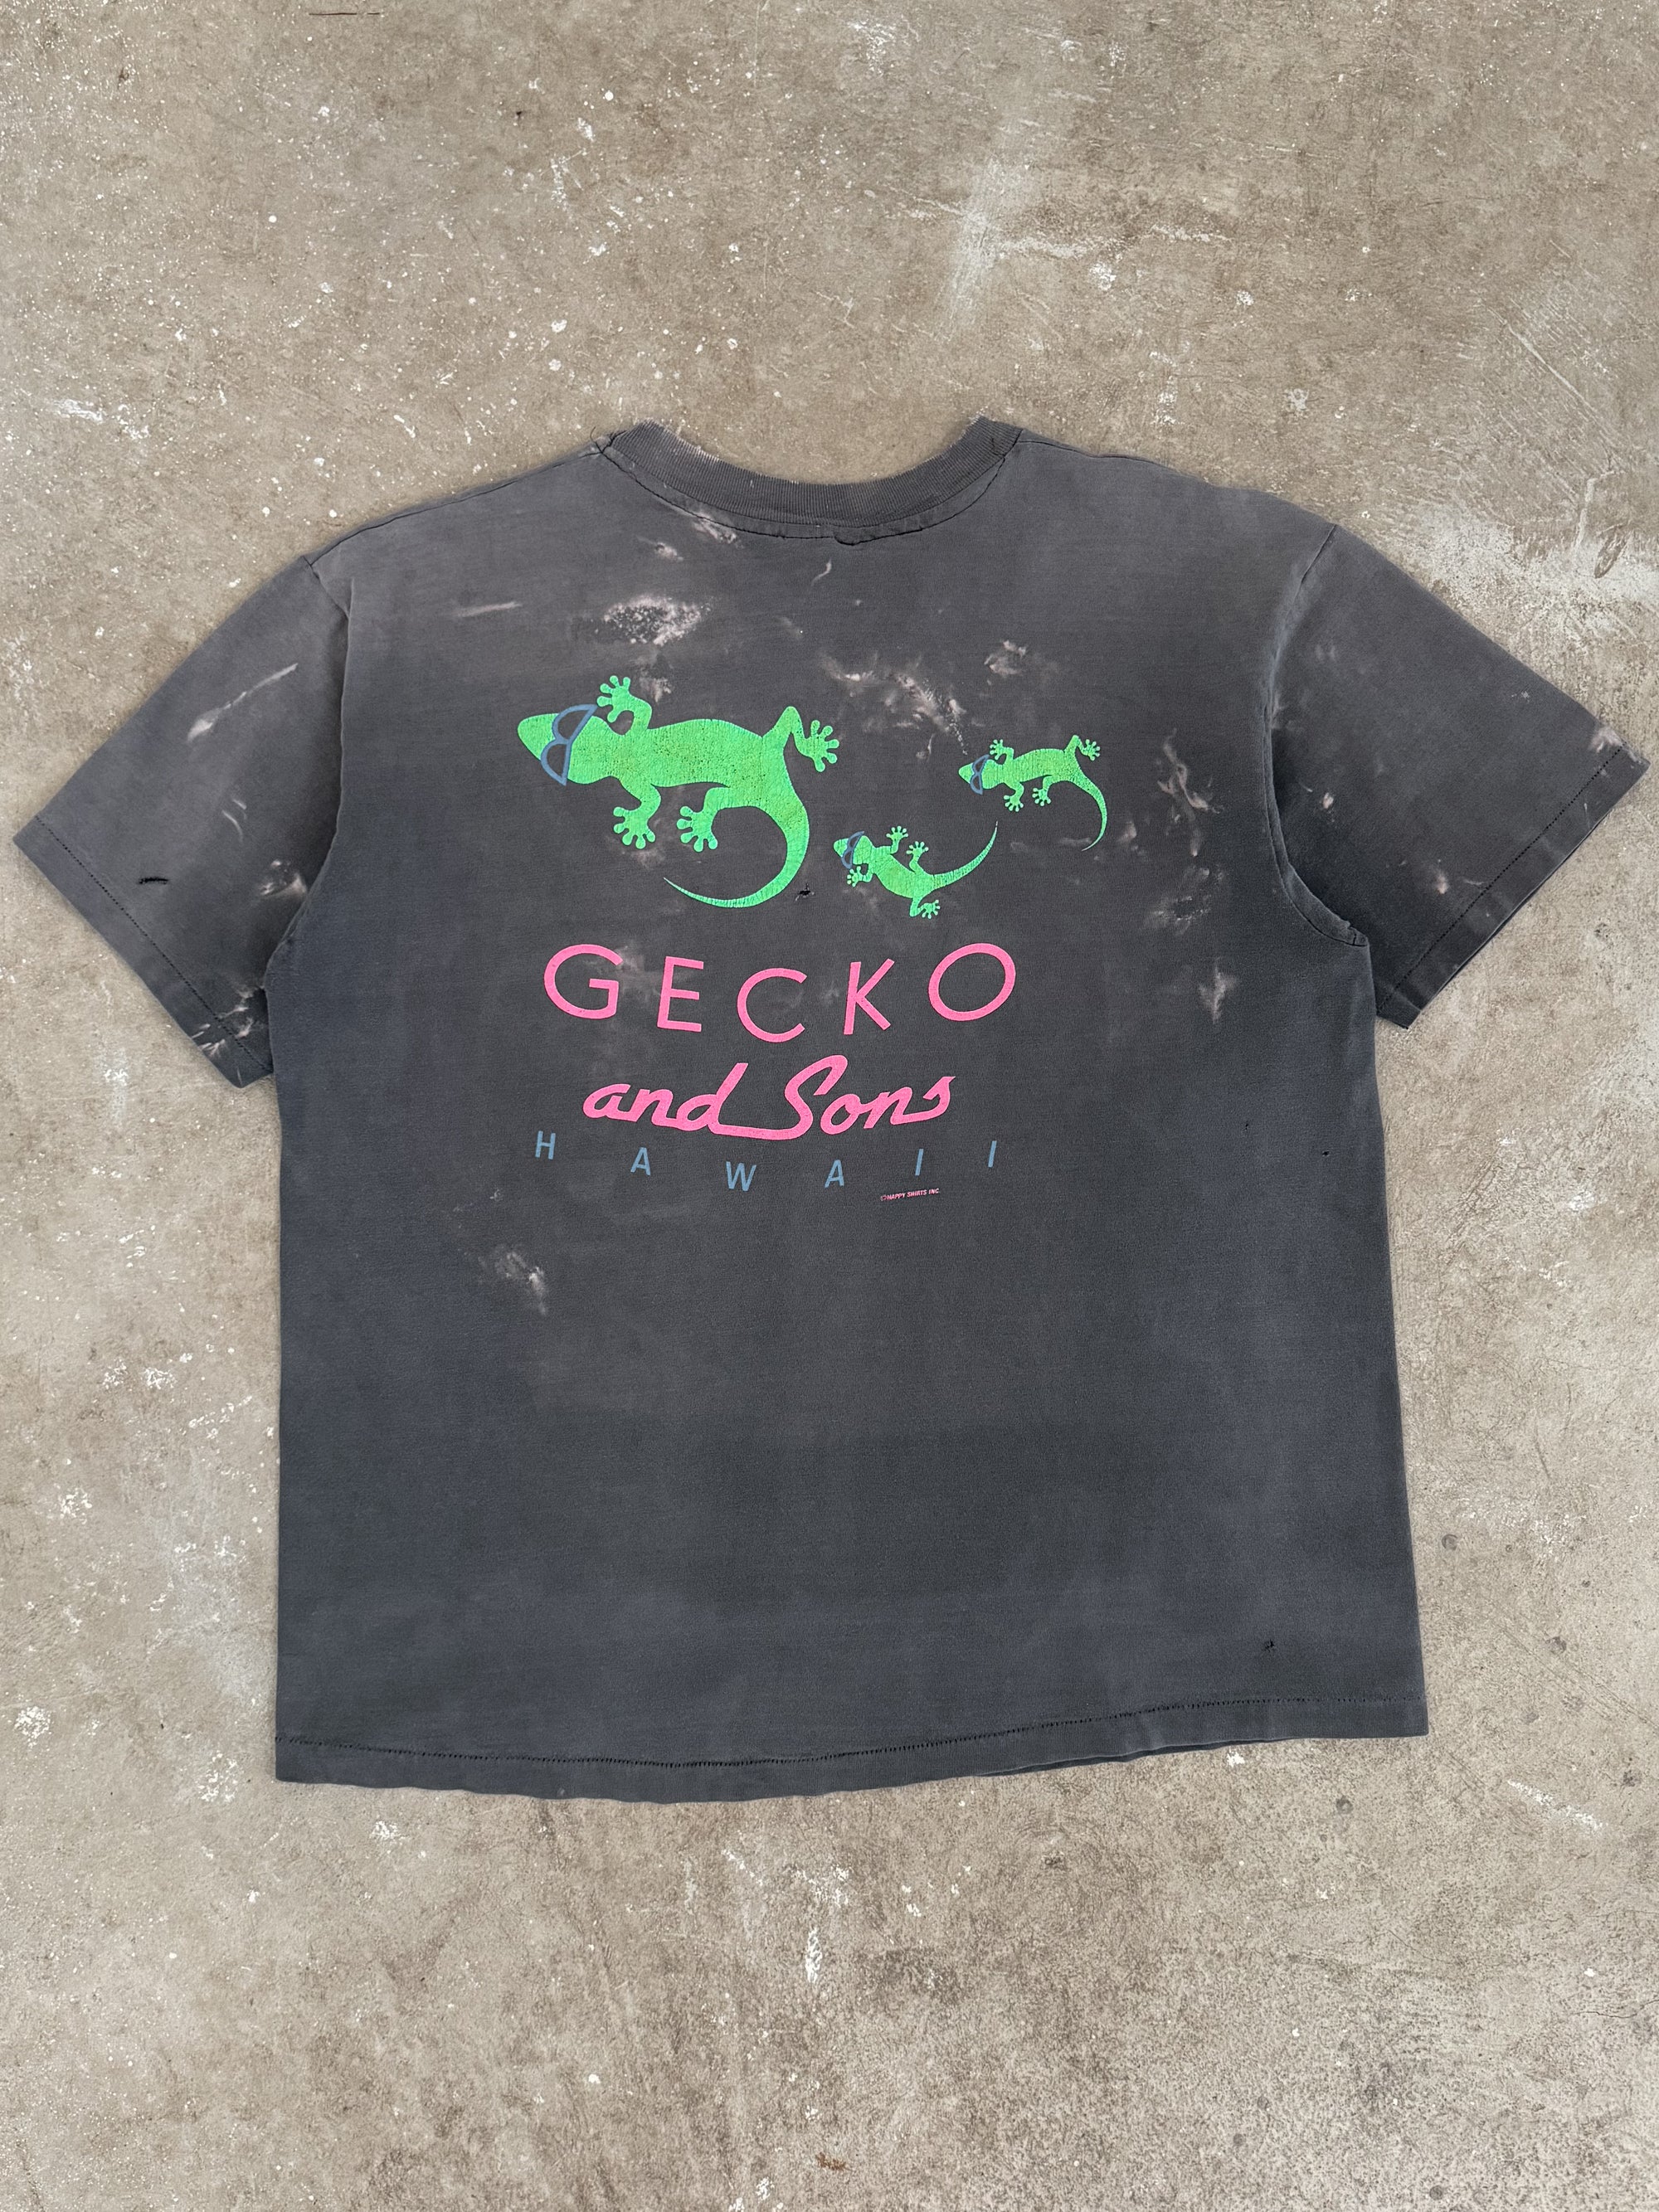 1980s/90s "Gecko and Sons" Sun Faded Tee (L)